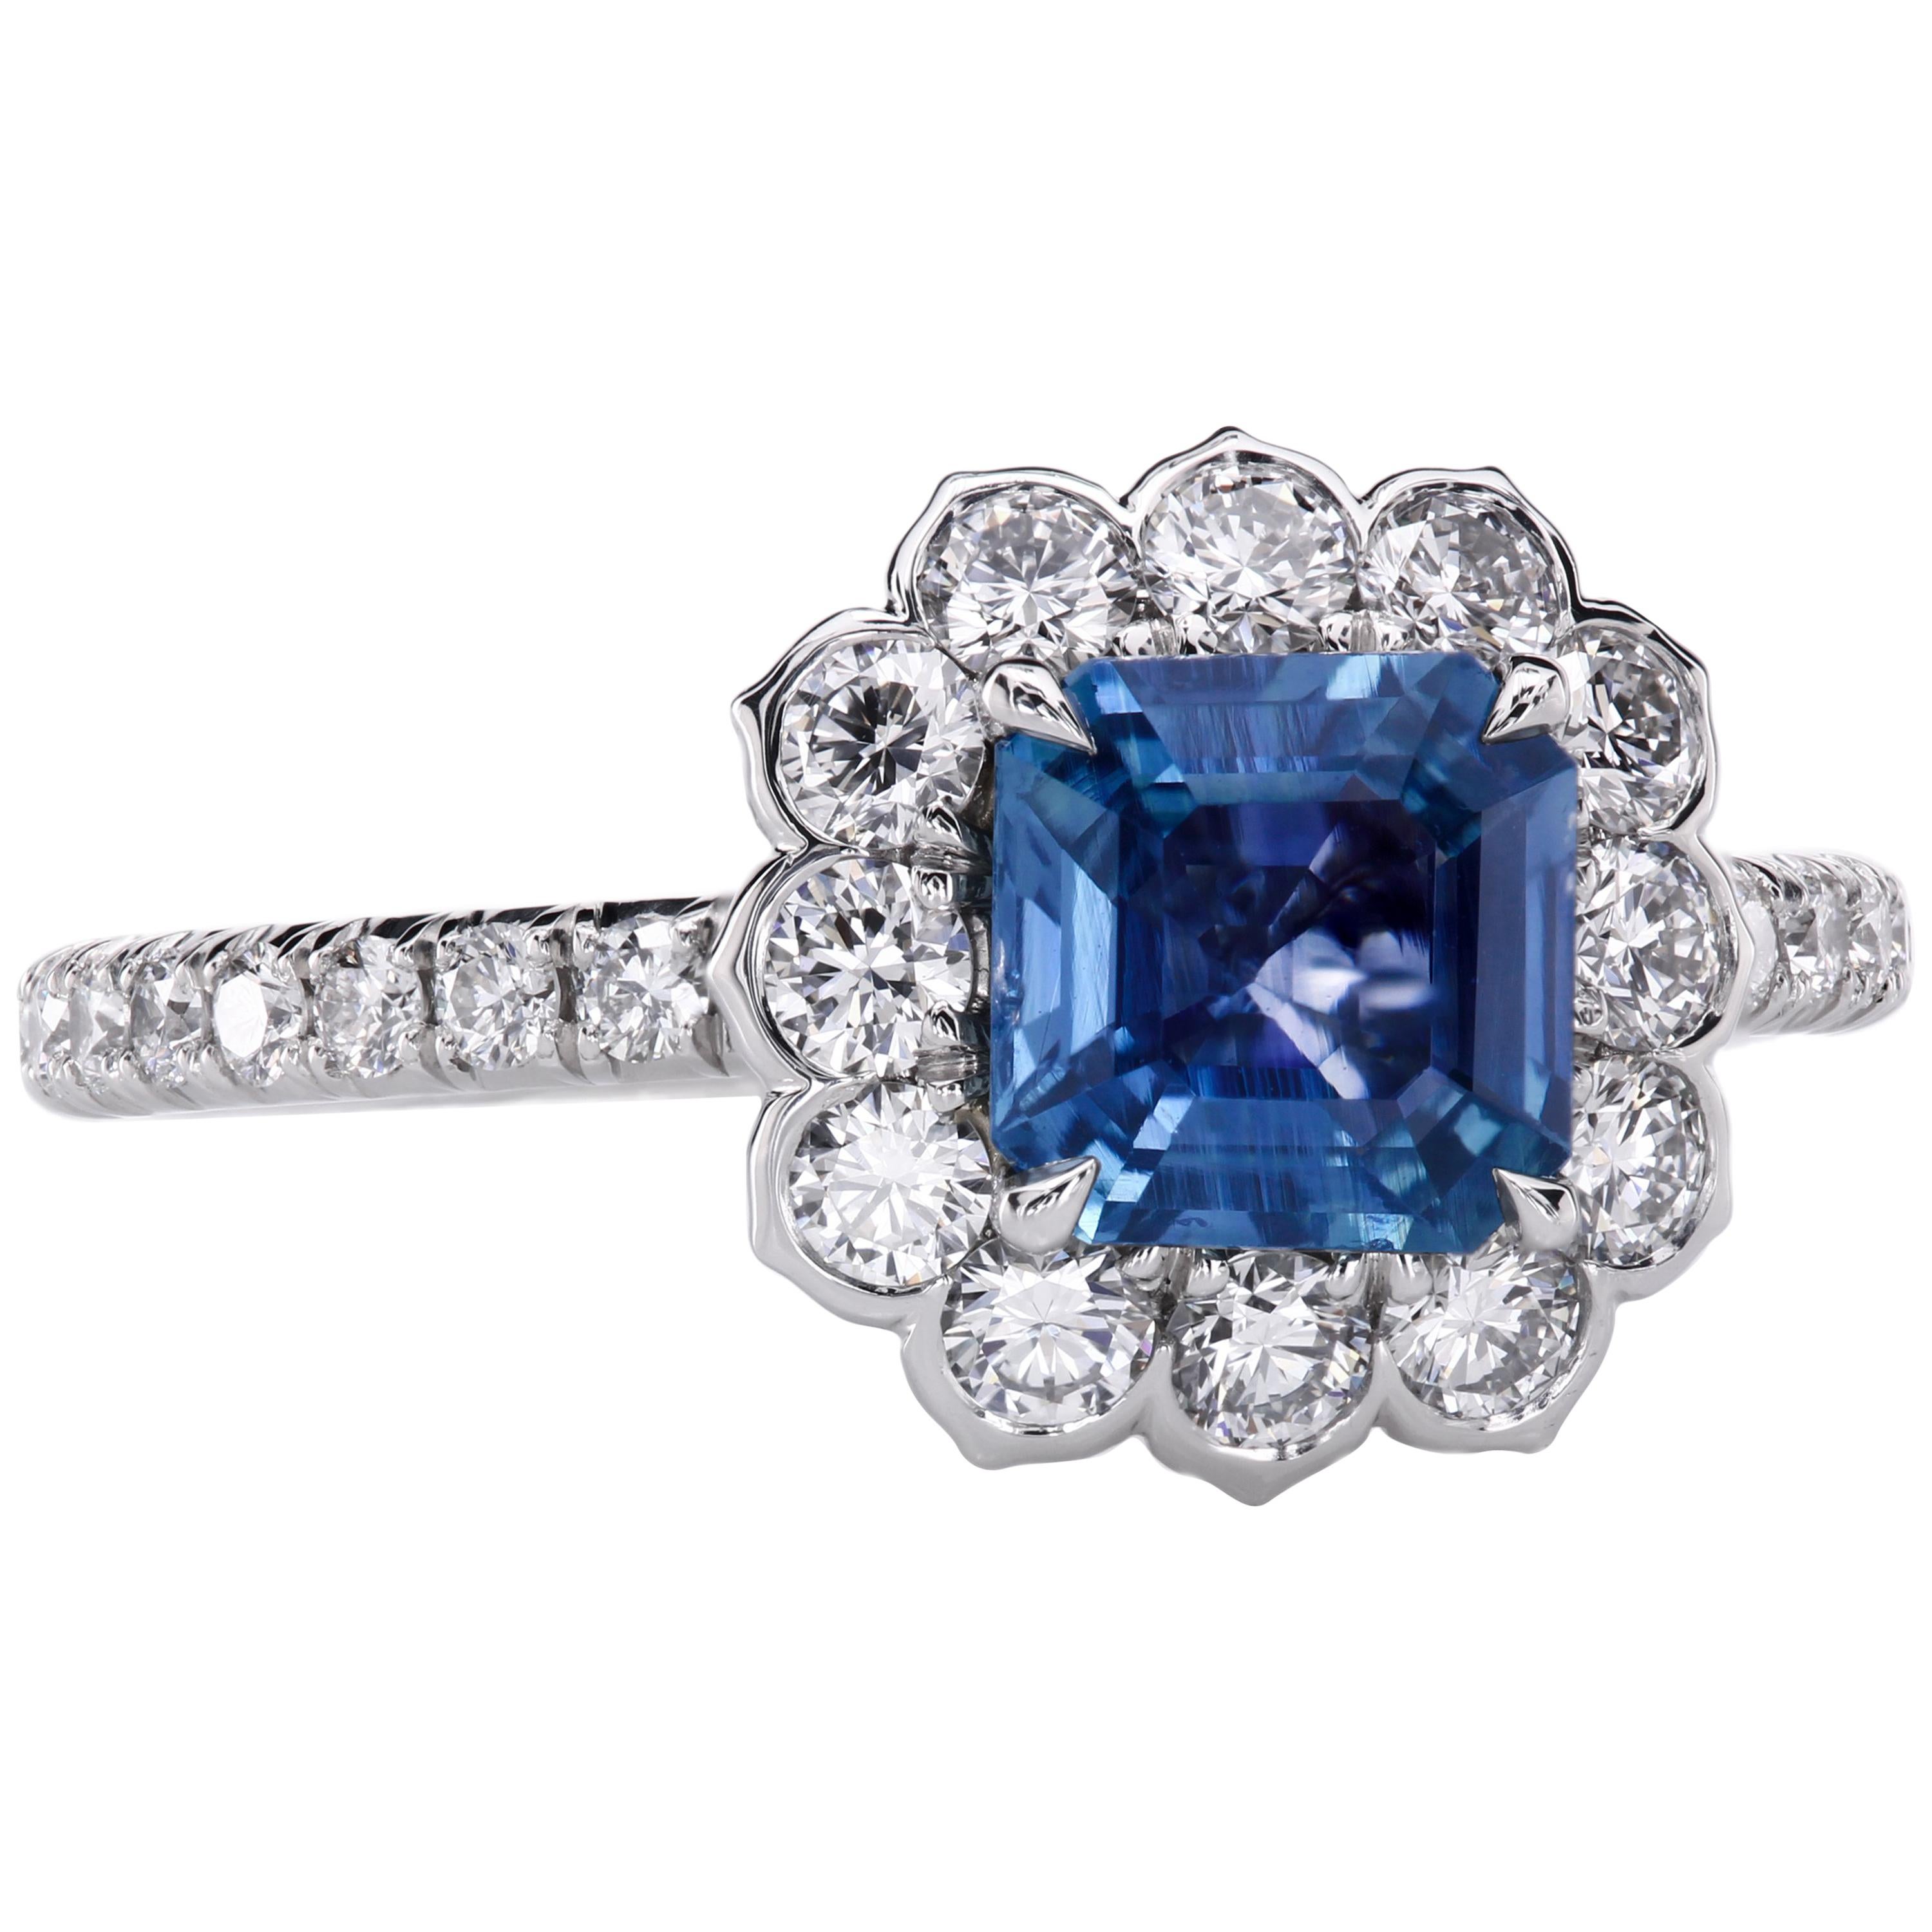 Leon Mege Lotus Halo Engagement Ring with Blue Sapphire Diamond Micro Pave